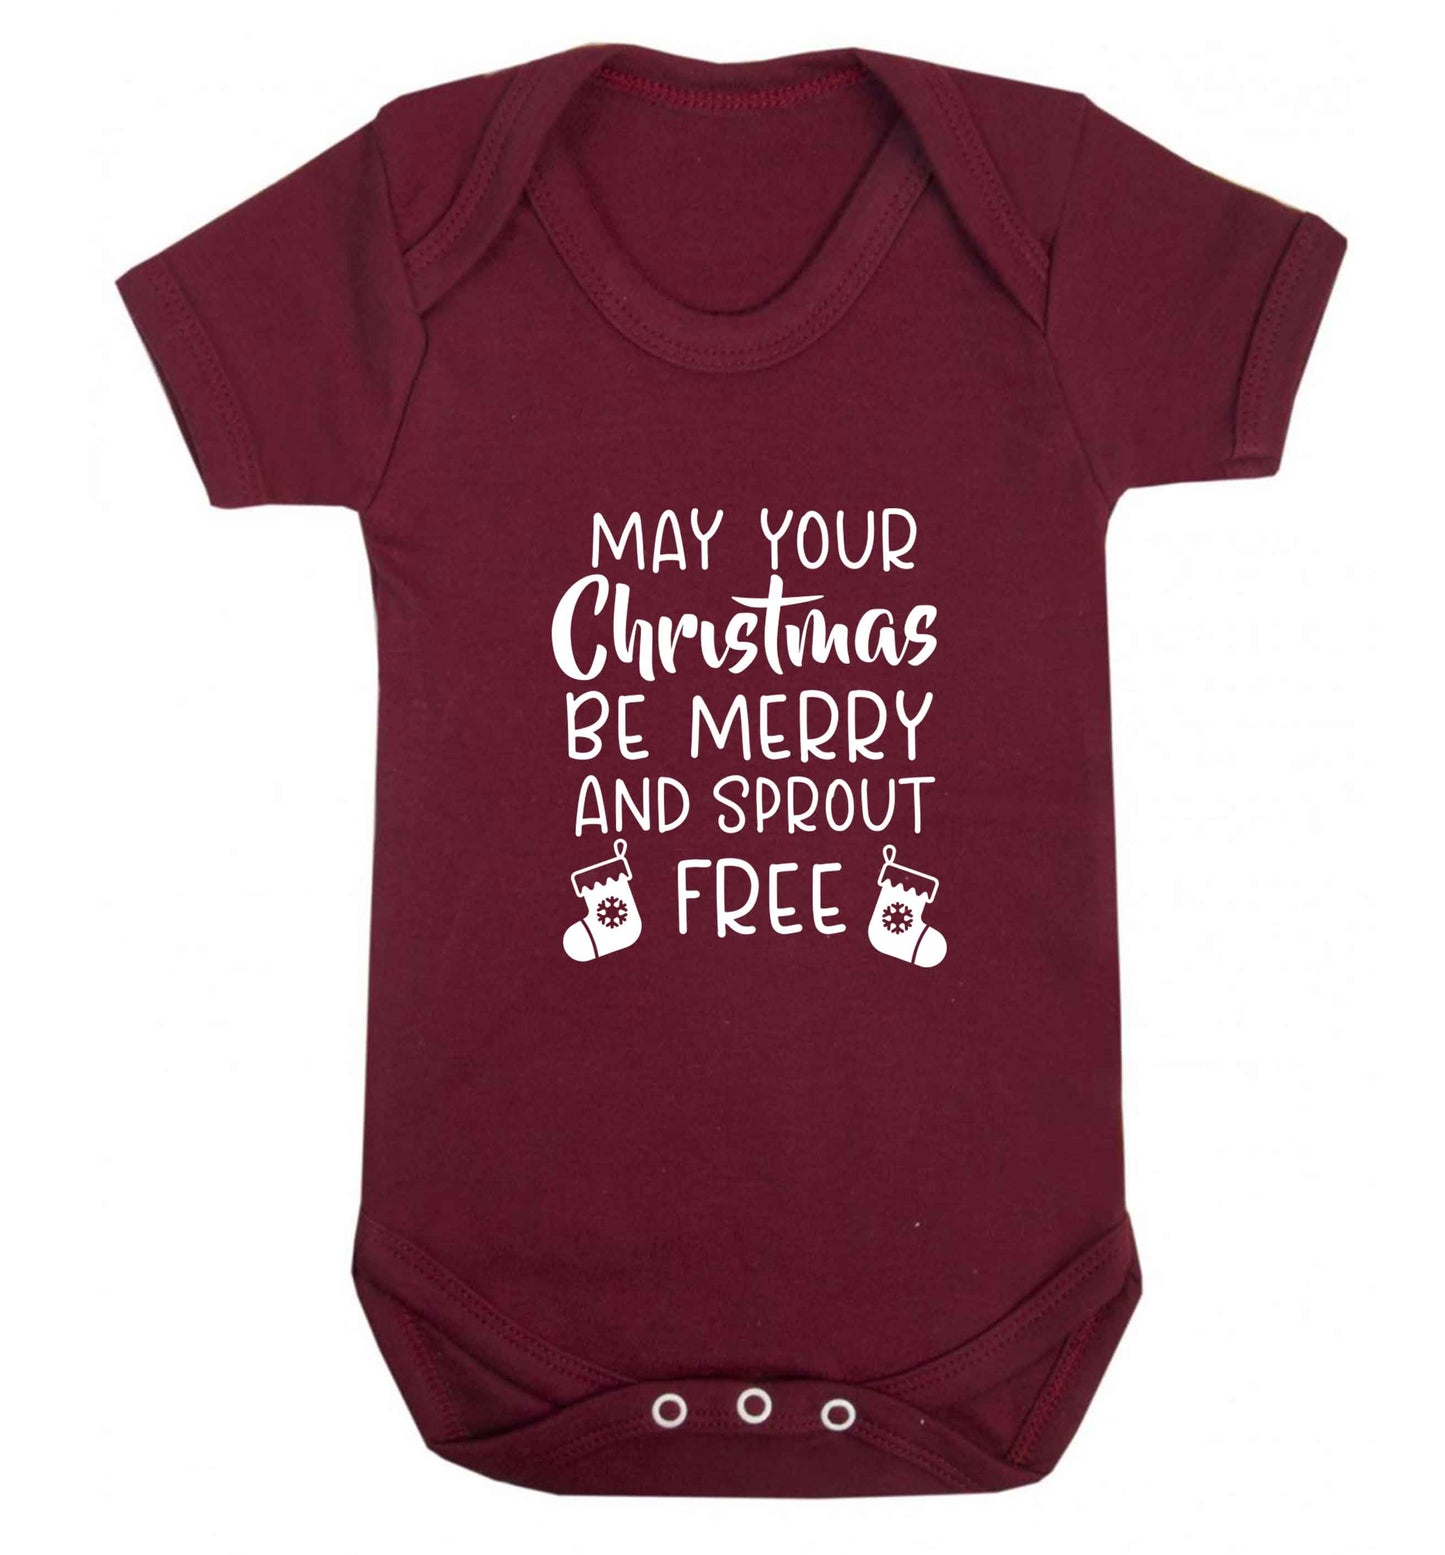 May your Christmas be merry and sprout free baby vest maroon 18-24 months